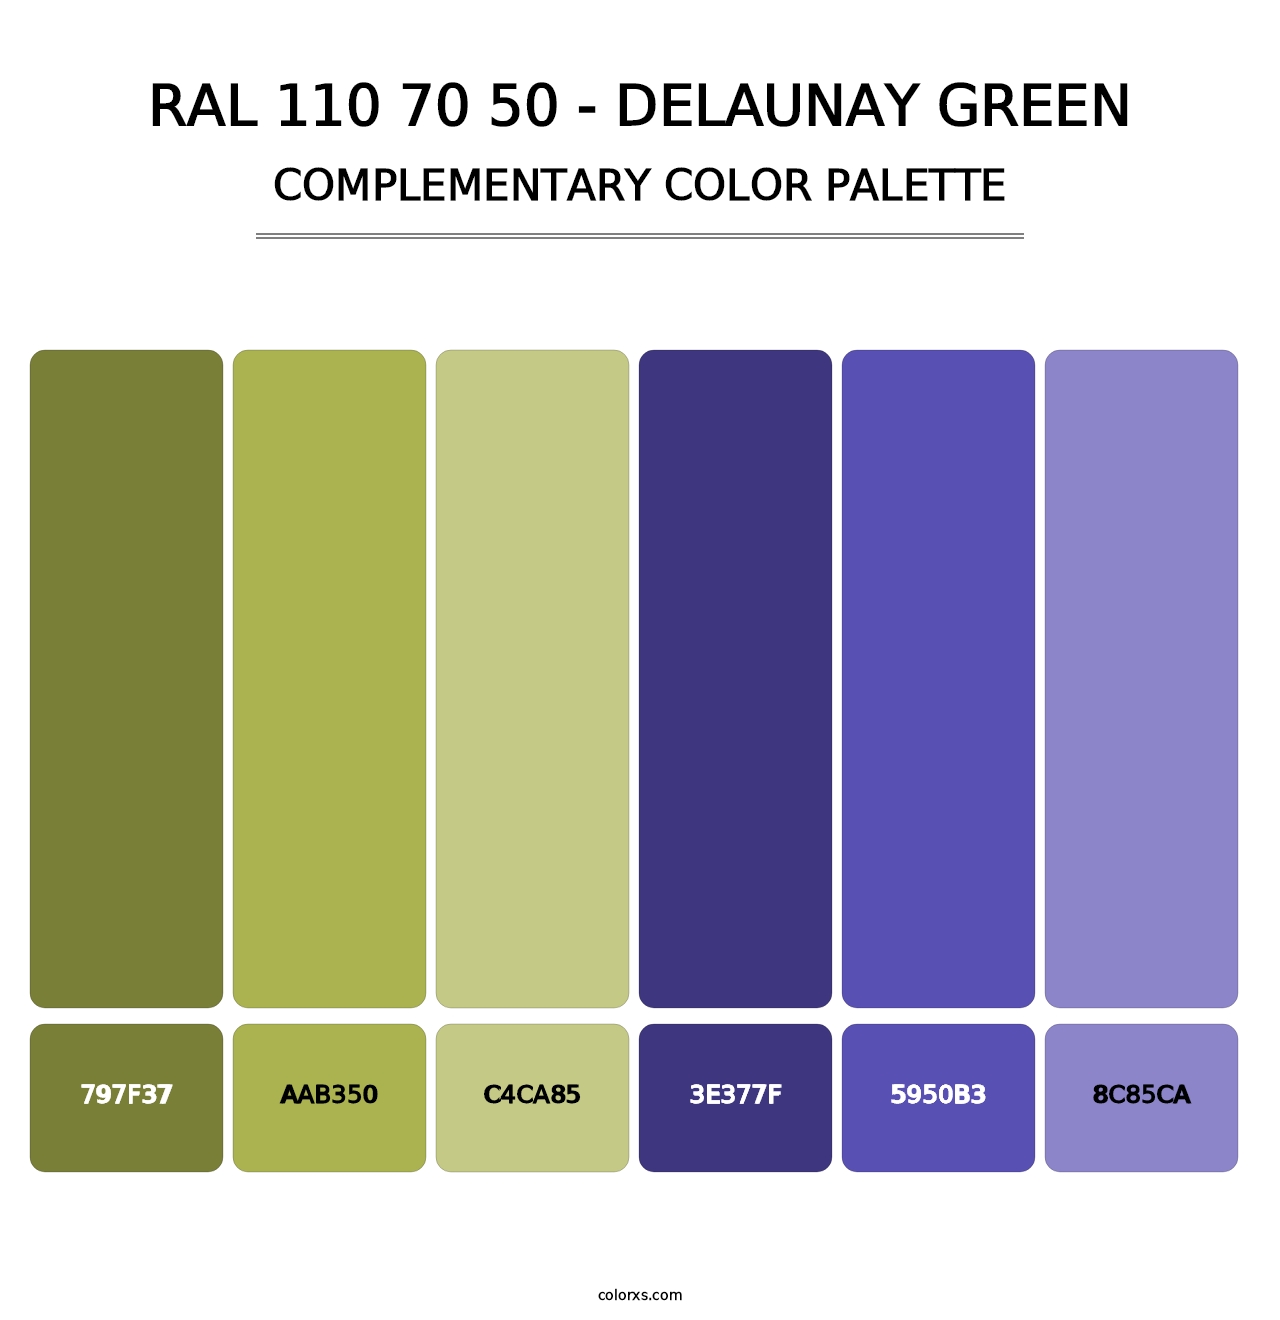 RAL 110 70 50 - Delaunay Green - Complementary Color Palette